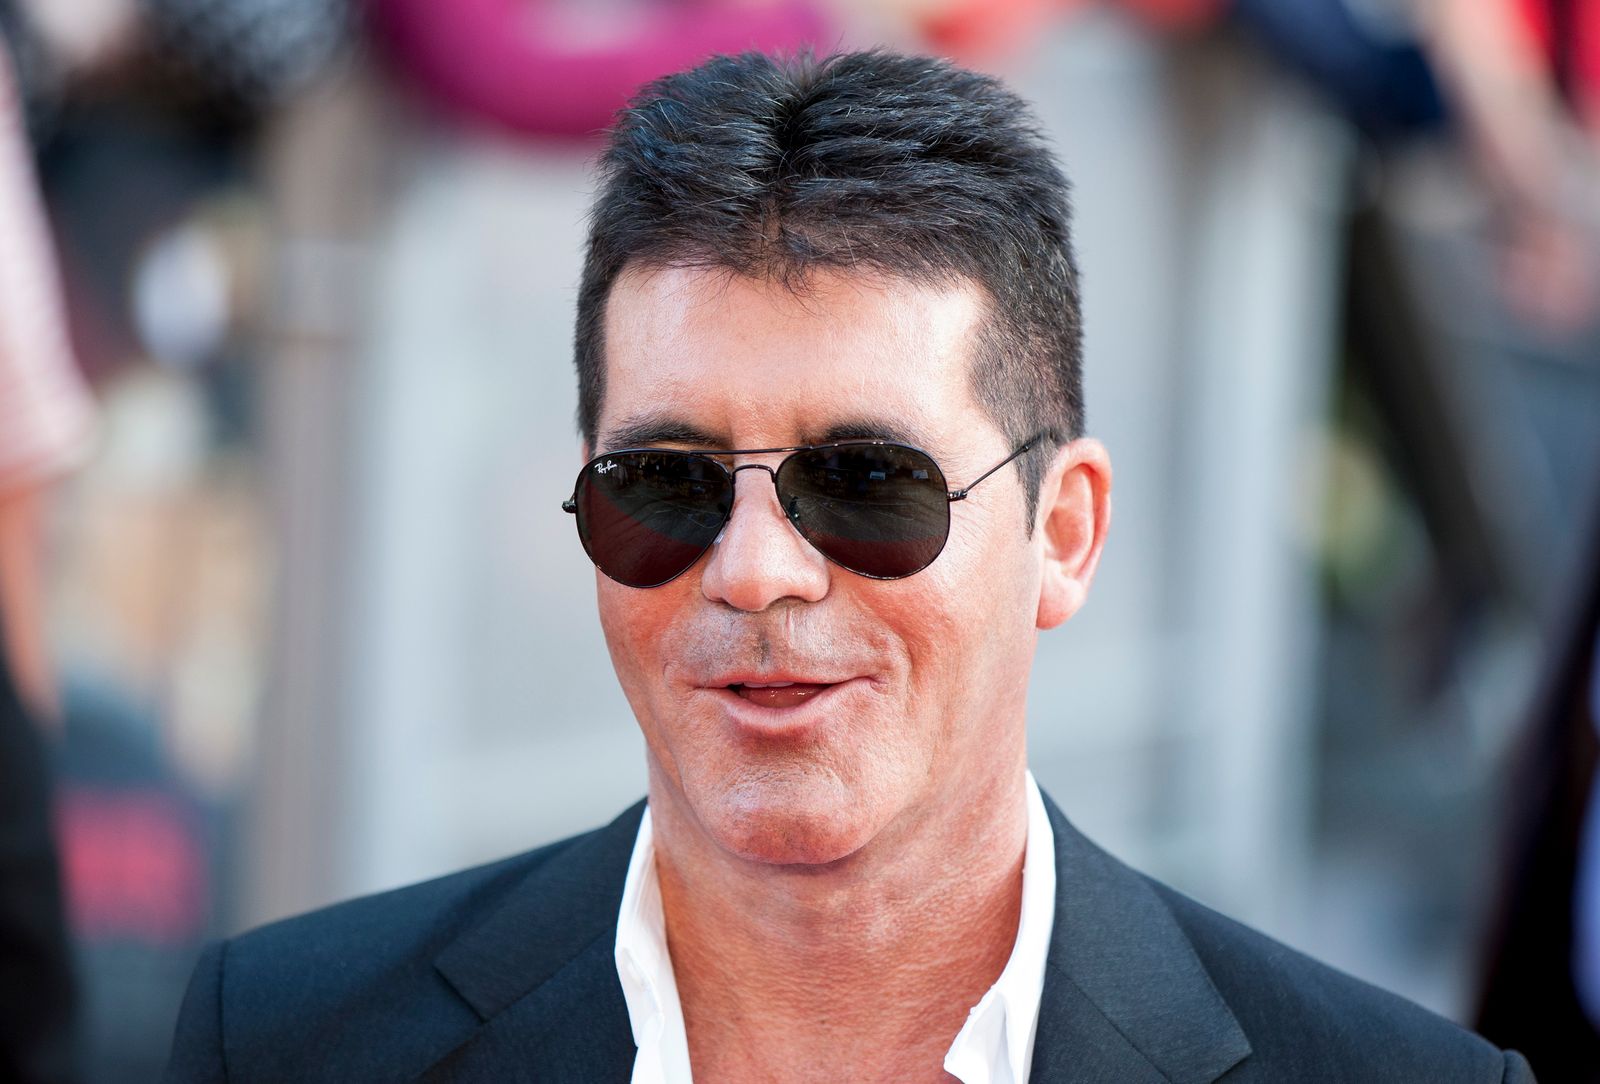 AGT Judge Simon Cowell. | Photo: Getty Images